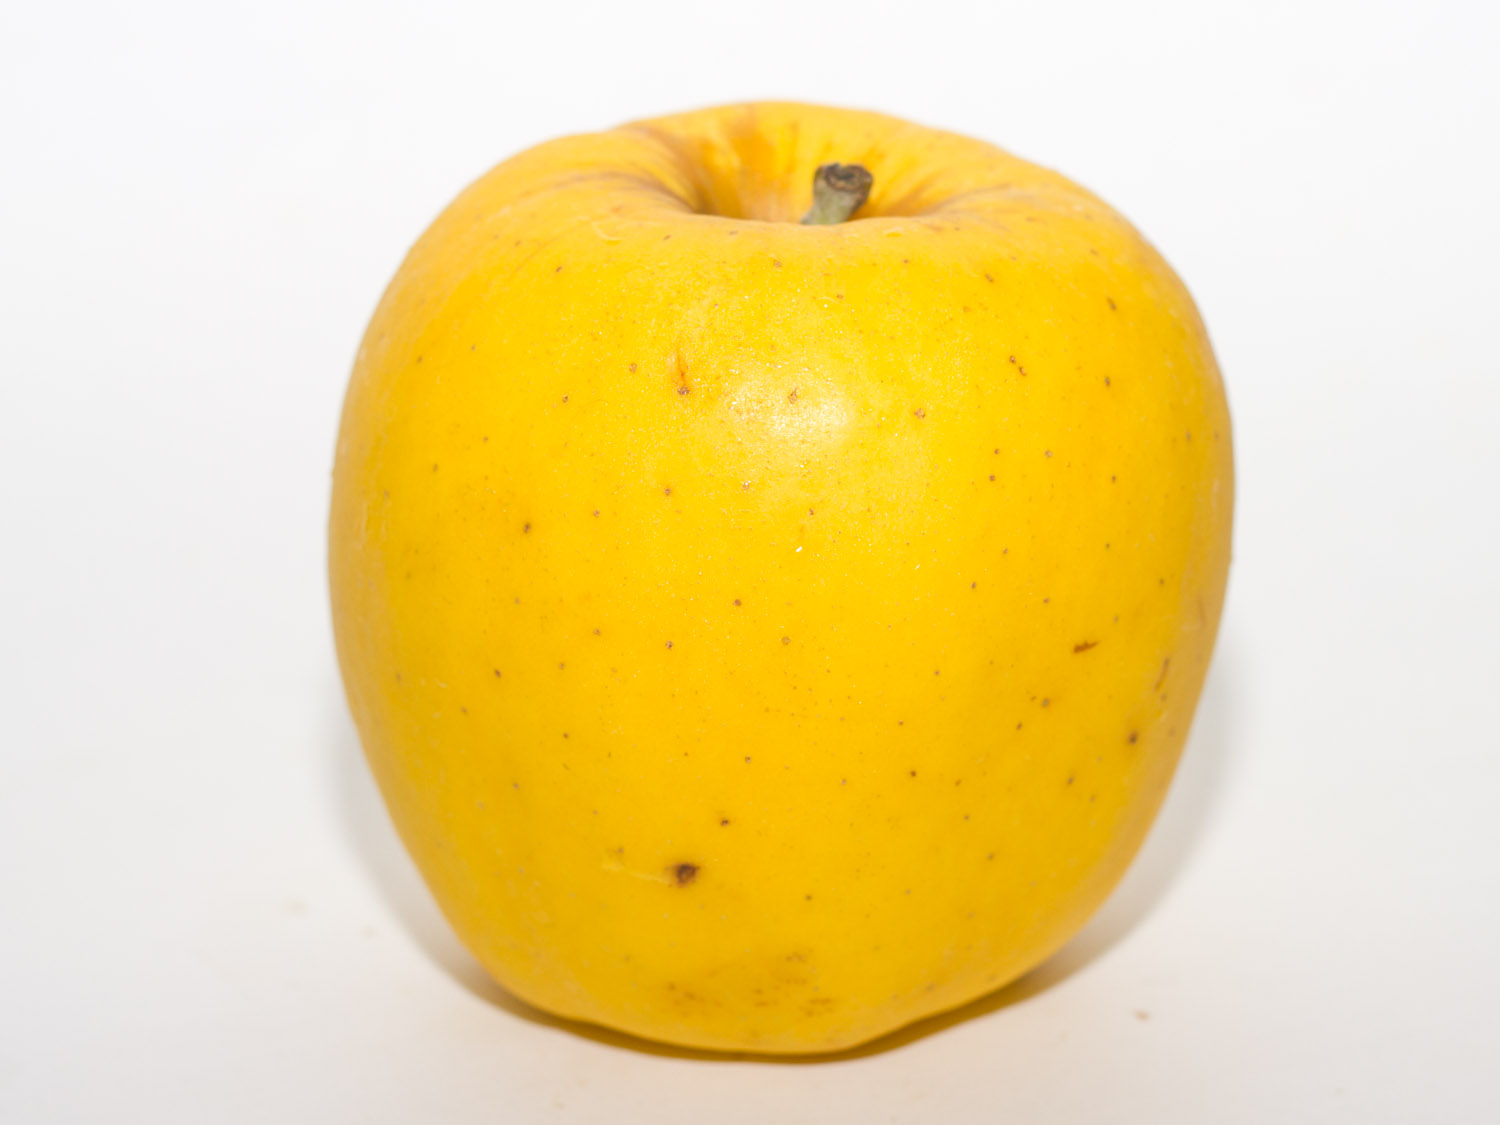 Have You Ever Tried an Opal Apple? | Serious Eats